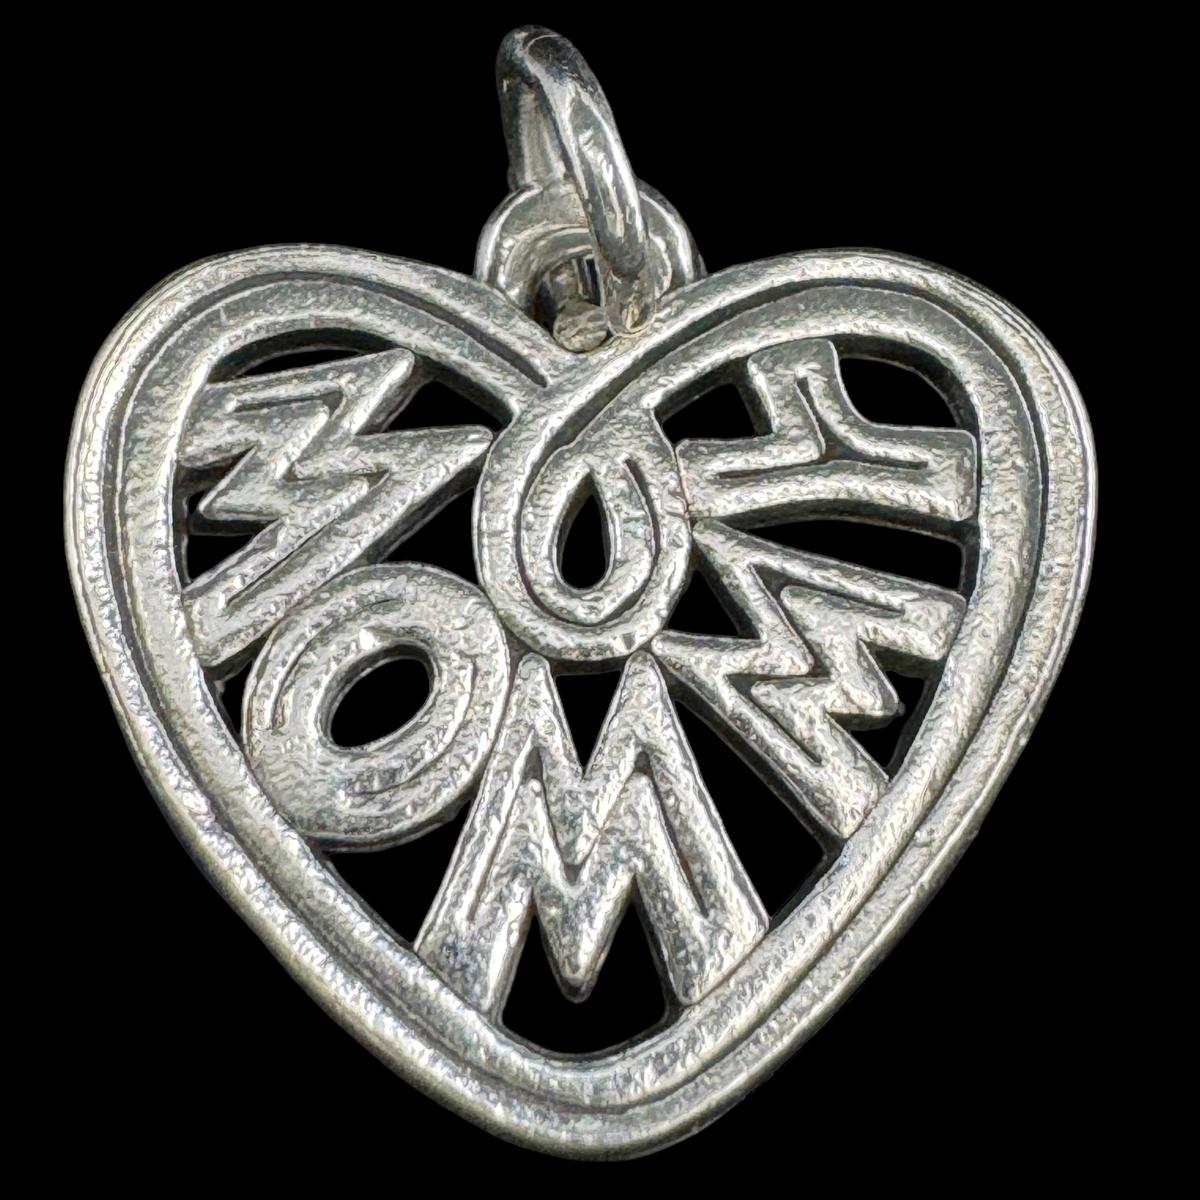 Estate James Avery sterling silver "MOMMY" charm